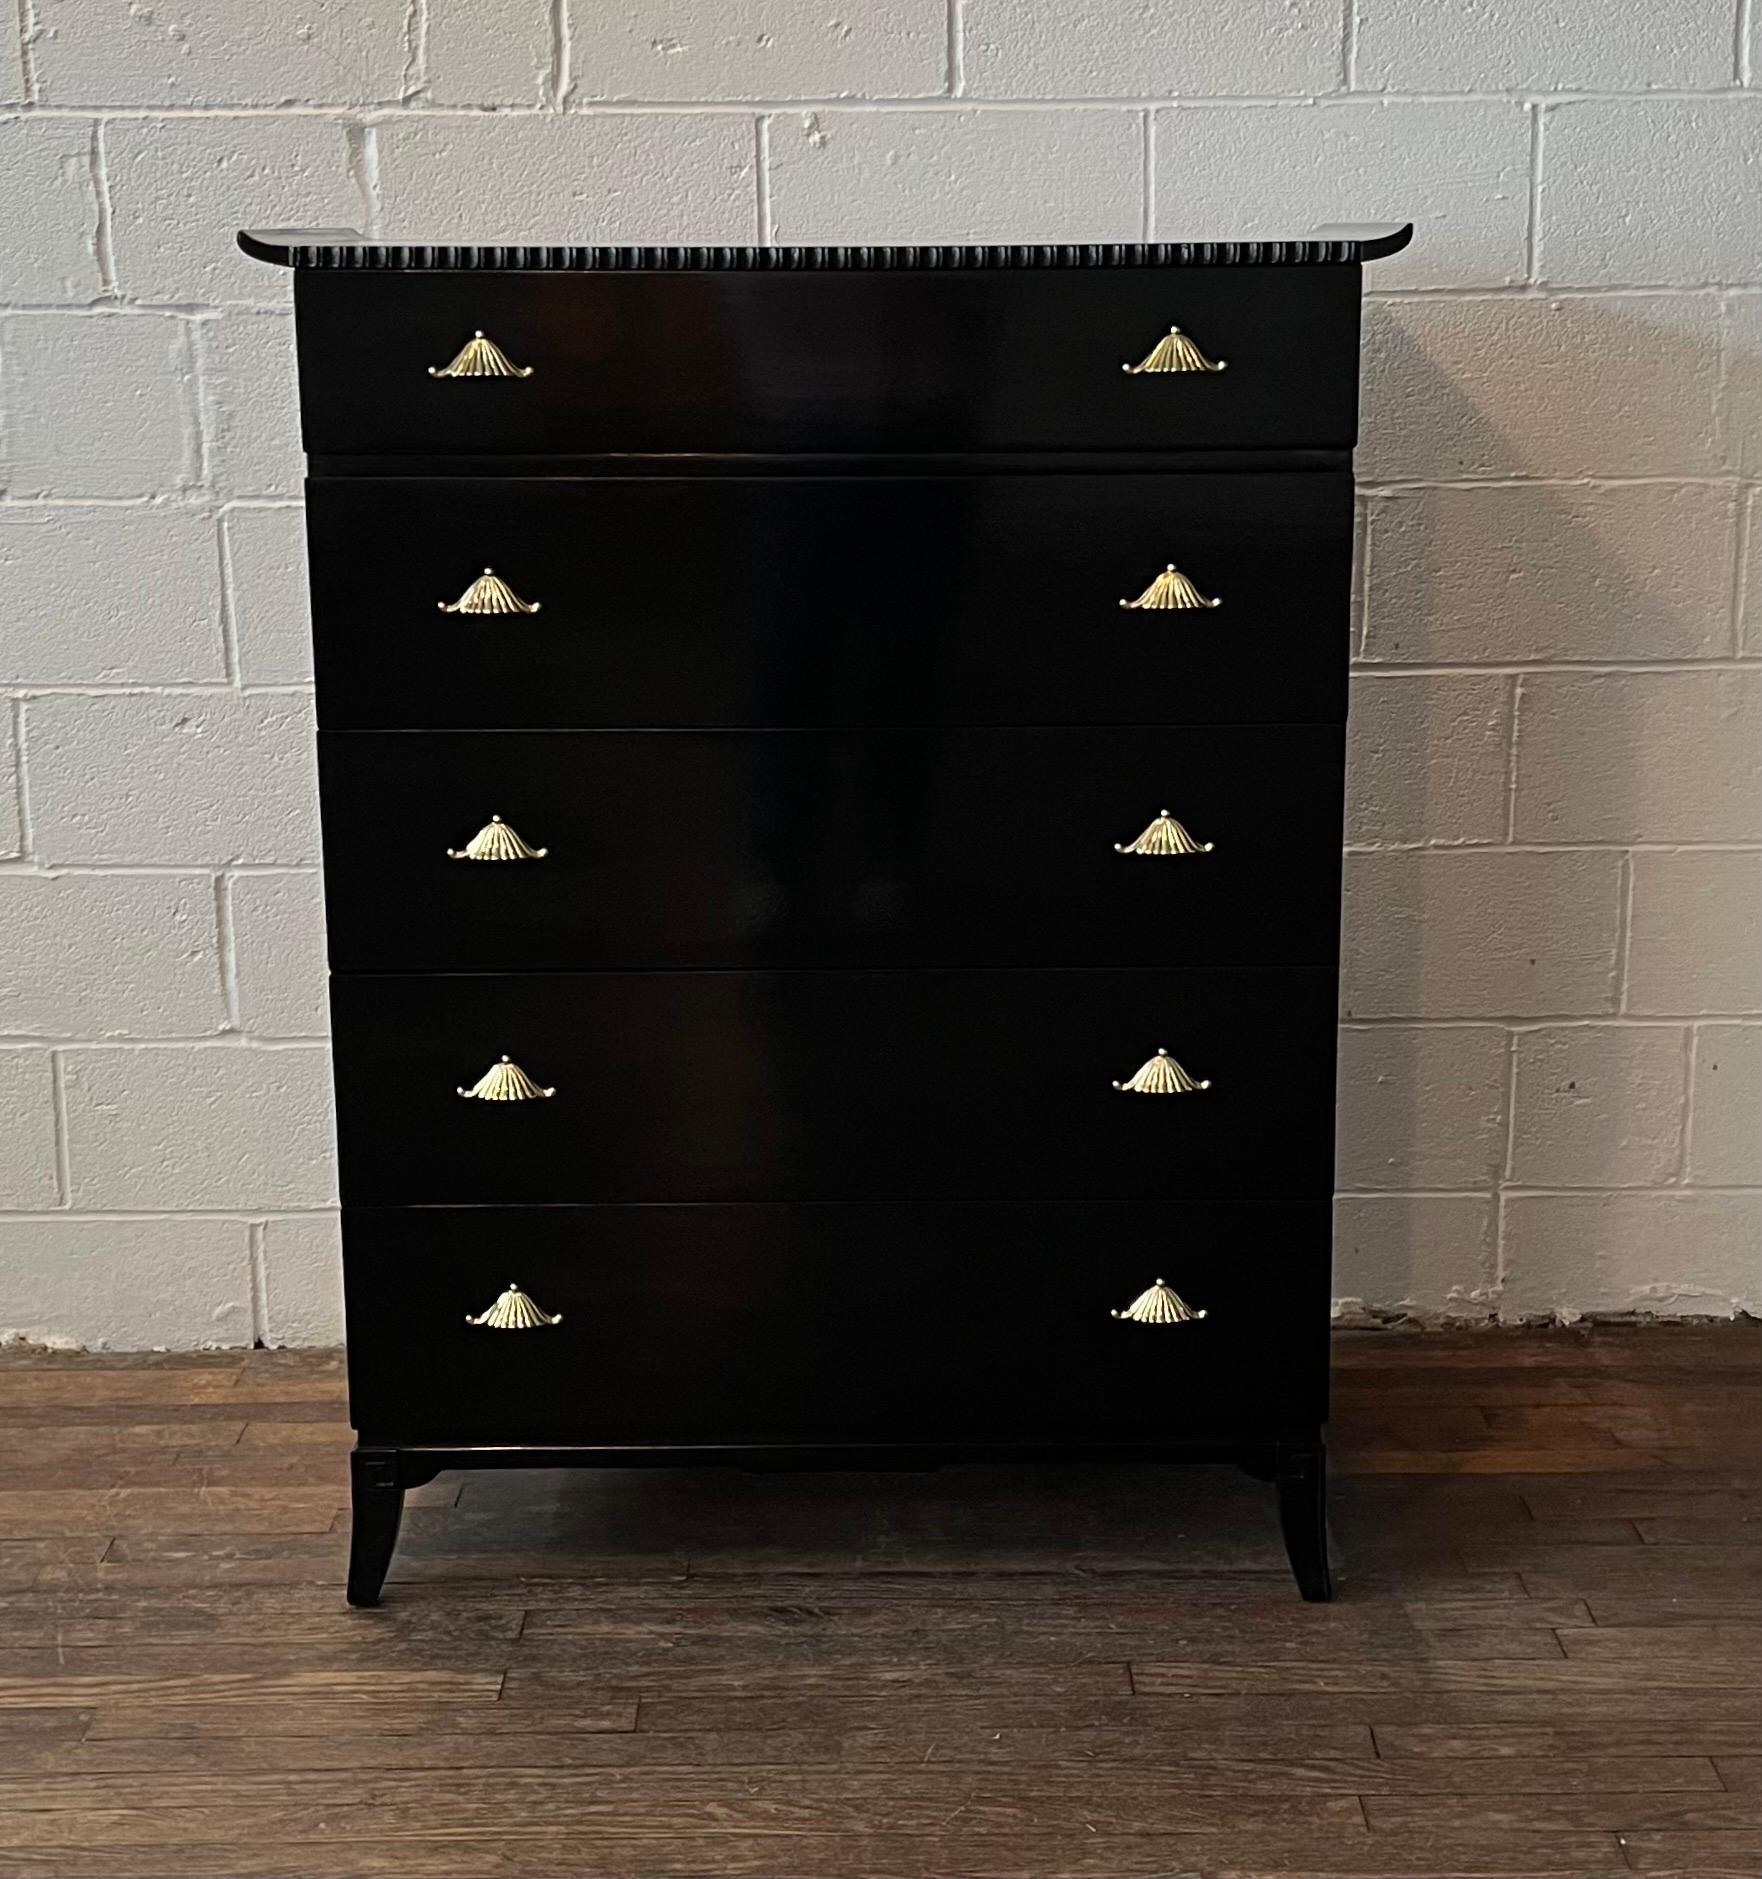 Very classy tall chest of drawers by Rway furniture company. Refinished in high gloss lacquer as well as re-plated pagoda pulls. Has a slight Asian twist to mid century modern feel very solid and well built. James Mont styling with pagoda detailing,